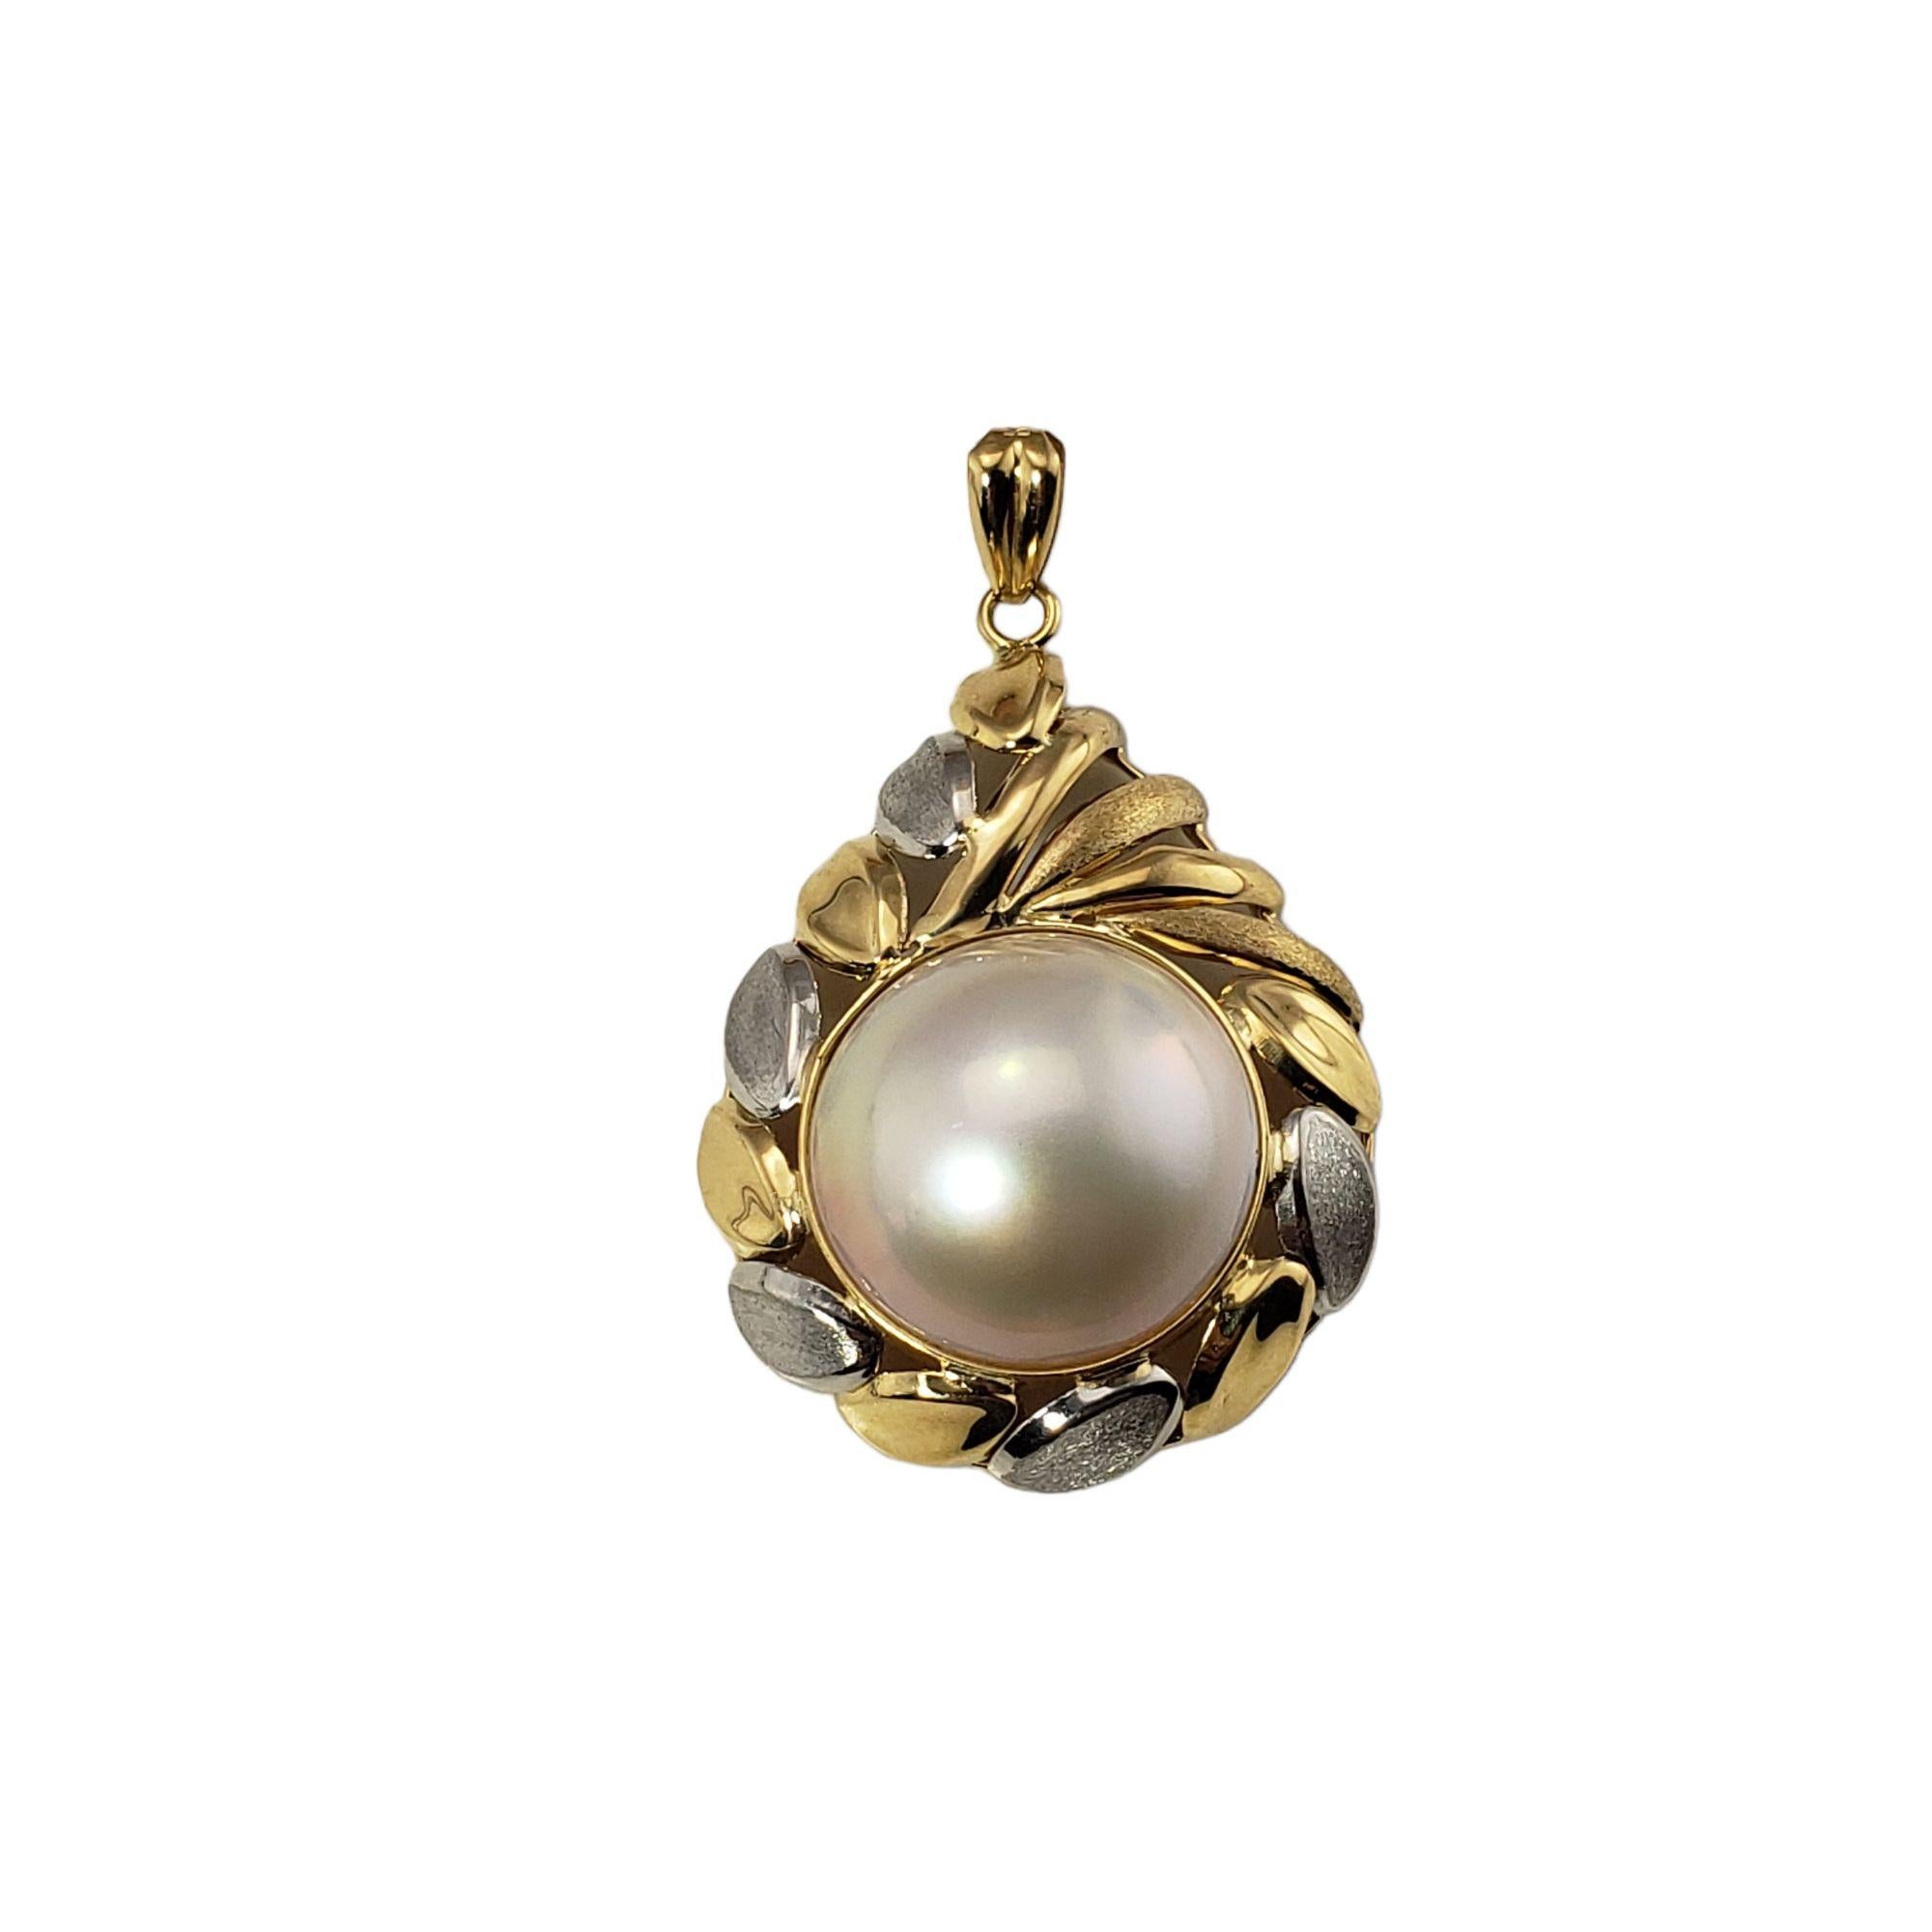 Vintage 18 Karat Yellow Gold and Platinum Pearl Pendant-

This stunning pendant features one round white pearl (16 mm) set in beautifully detailed 18K yellow gold and platinum.

Size: 34 mm x 23 mm

Weight: 3.2 dwt. / 5.0 gr.

Stamped: PT 900